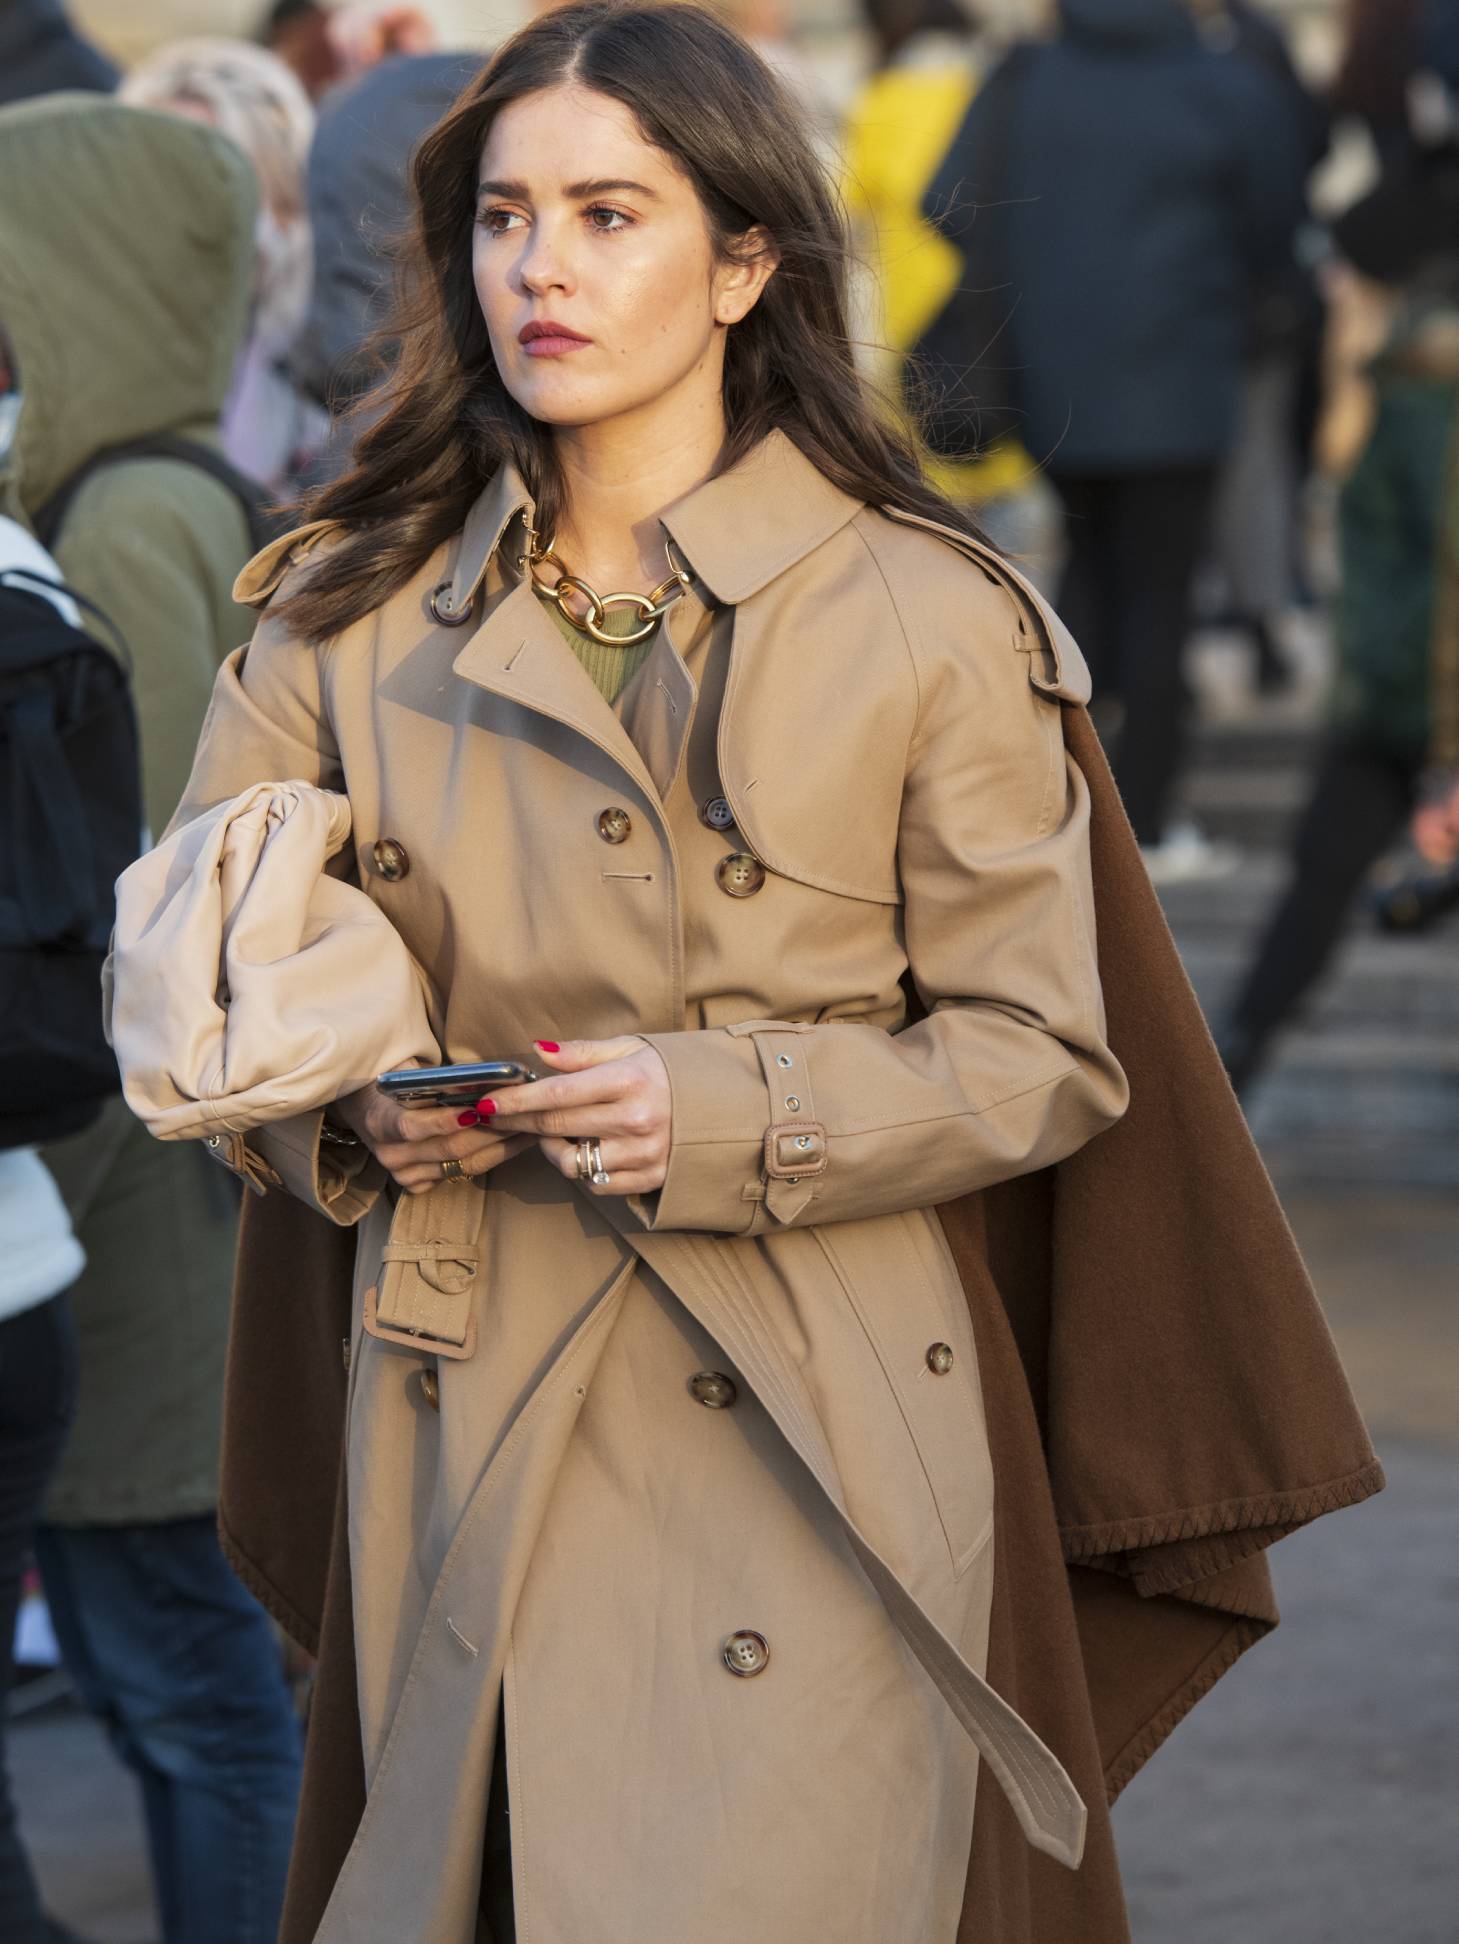 The Best Burberry Trench Coats for Women: Show-goer wears Burberry trench coat.